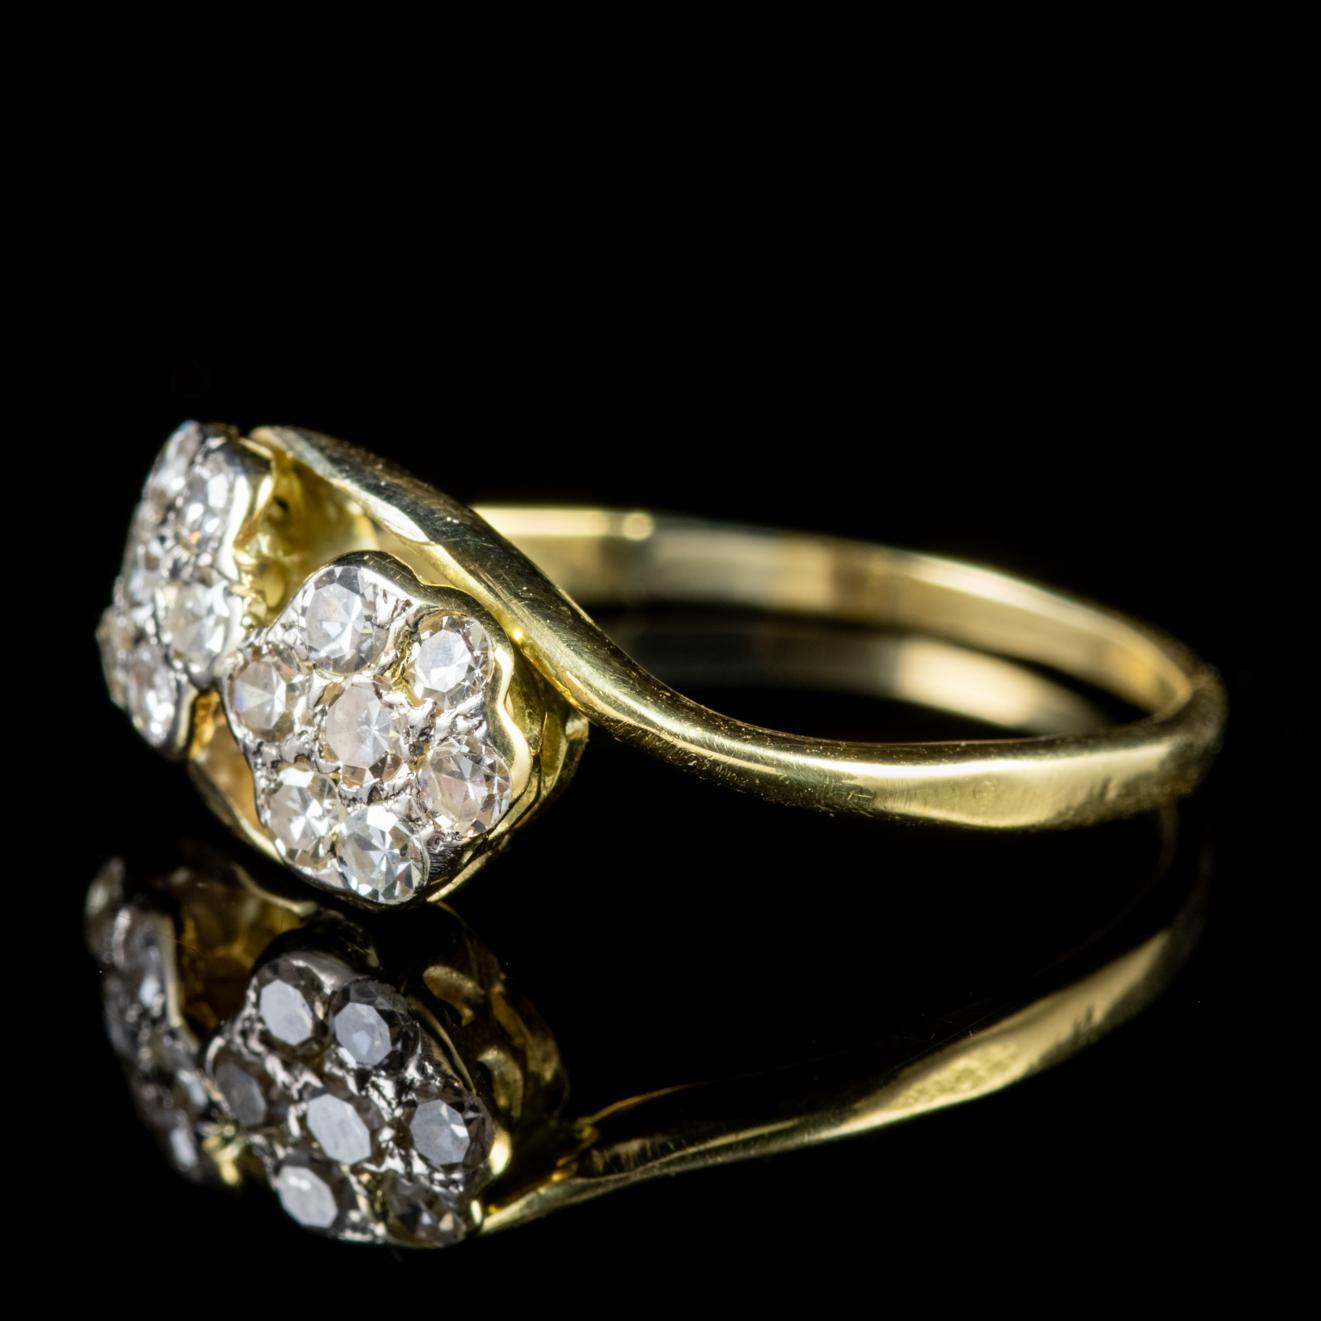 A gorgeous antique Edwardian cluster ring adorned with fourteen Diamonds which add up to approx. 0.40ct set out in the shape of two lovely flowers. 

The Edwardian period was also known as the ‘Beautiful era’ and engagement rings were romantic and